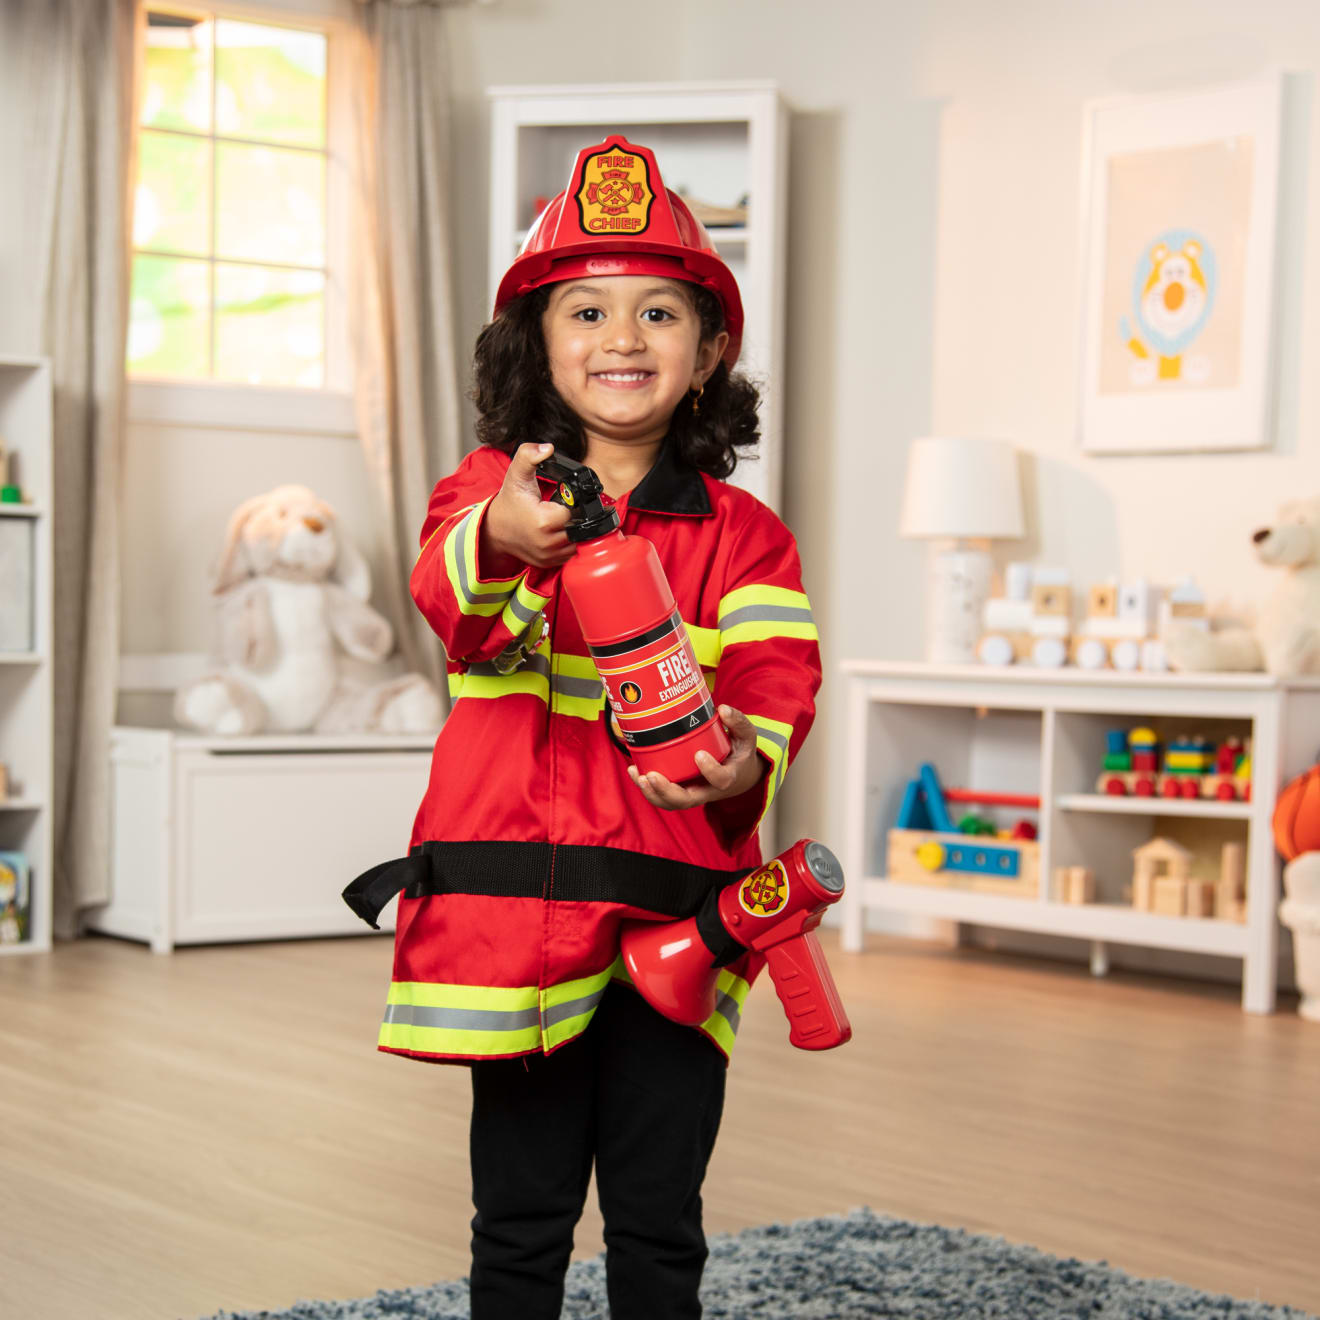 Firefighter Costume Set | Firefighter Role Play Outfit